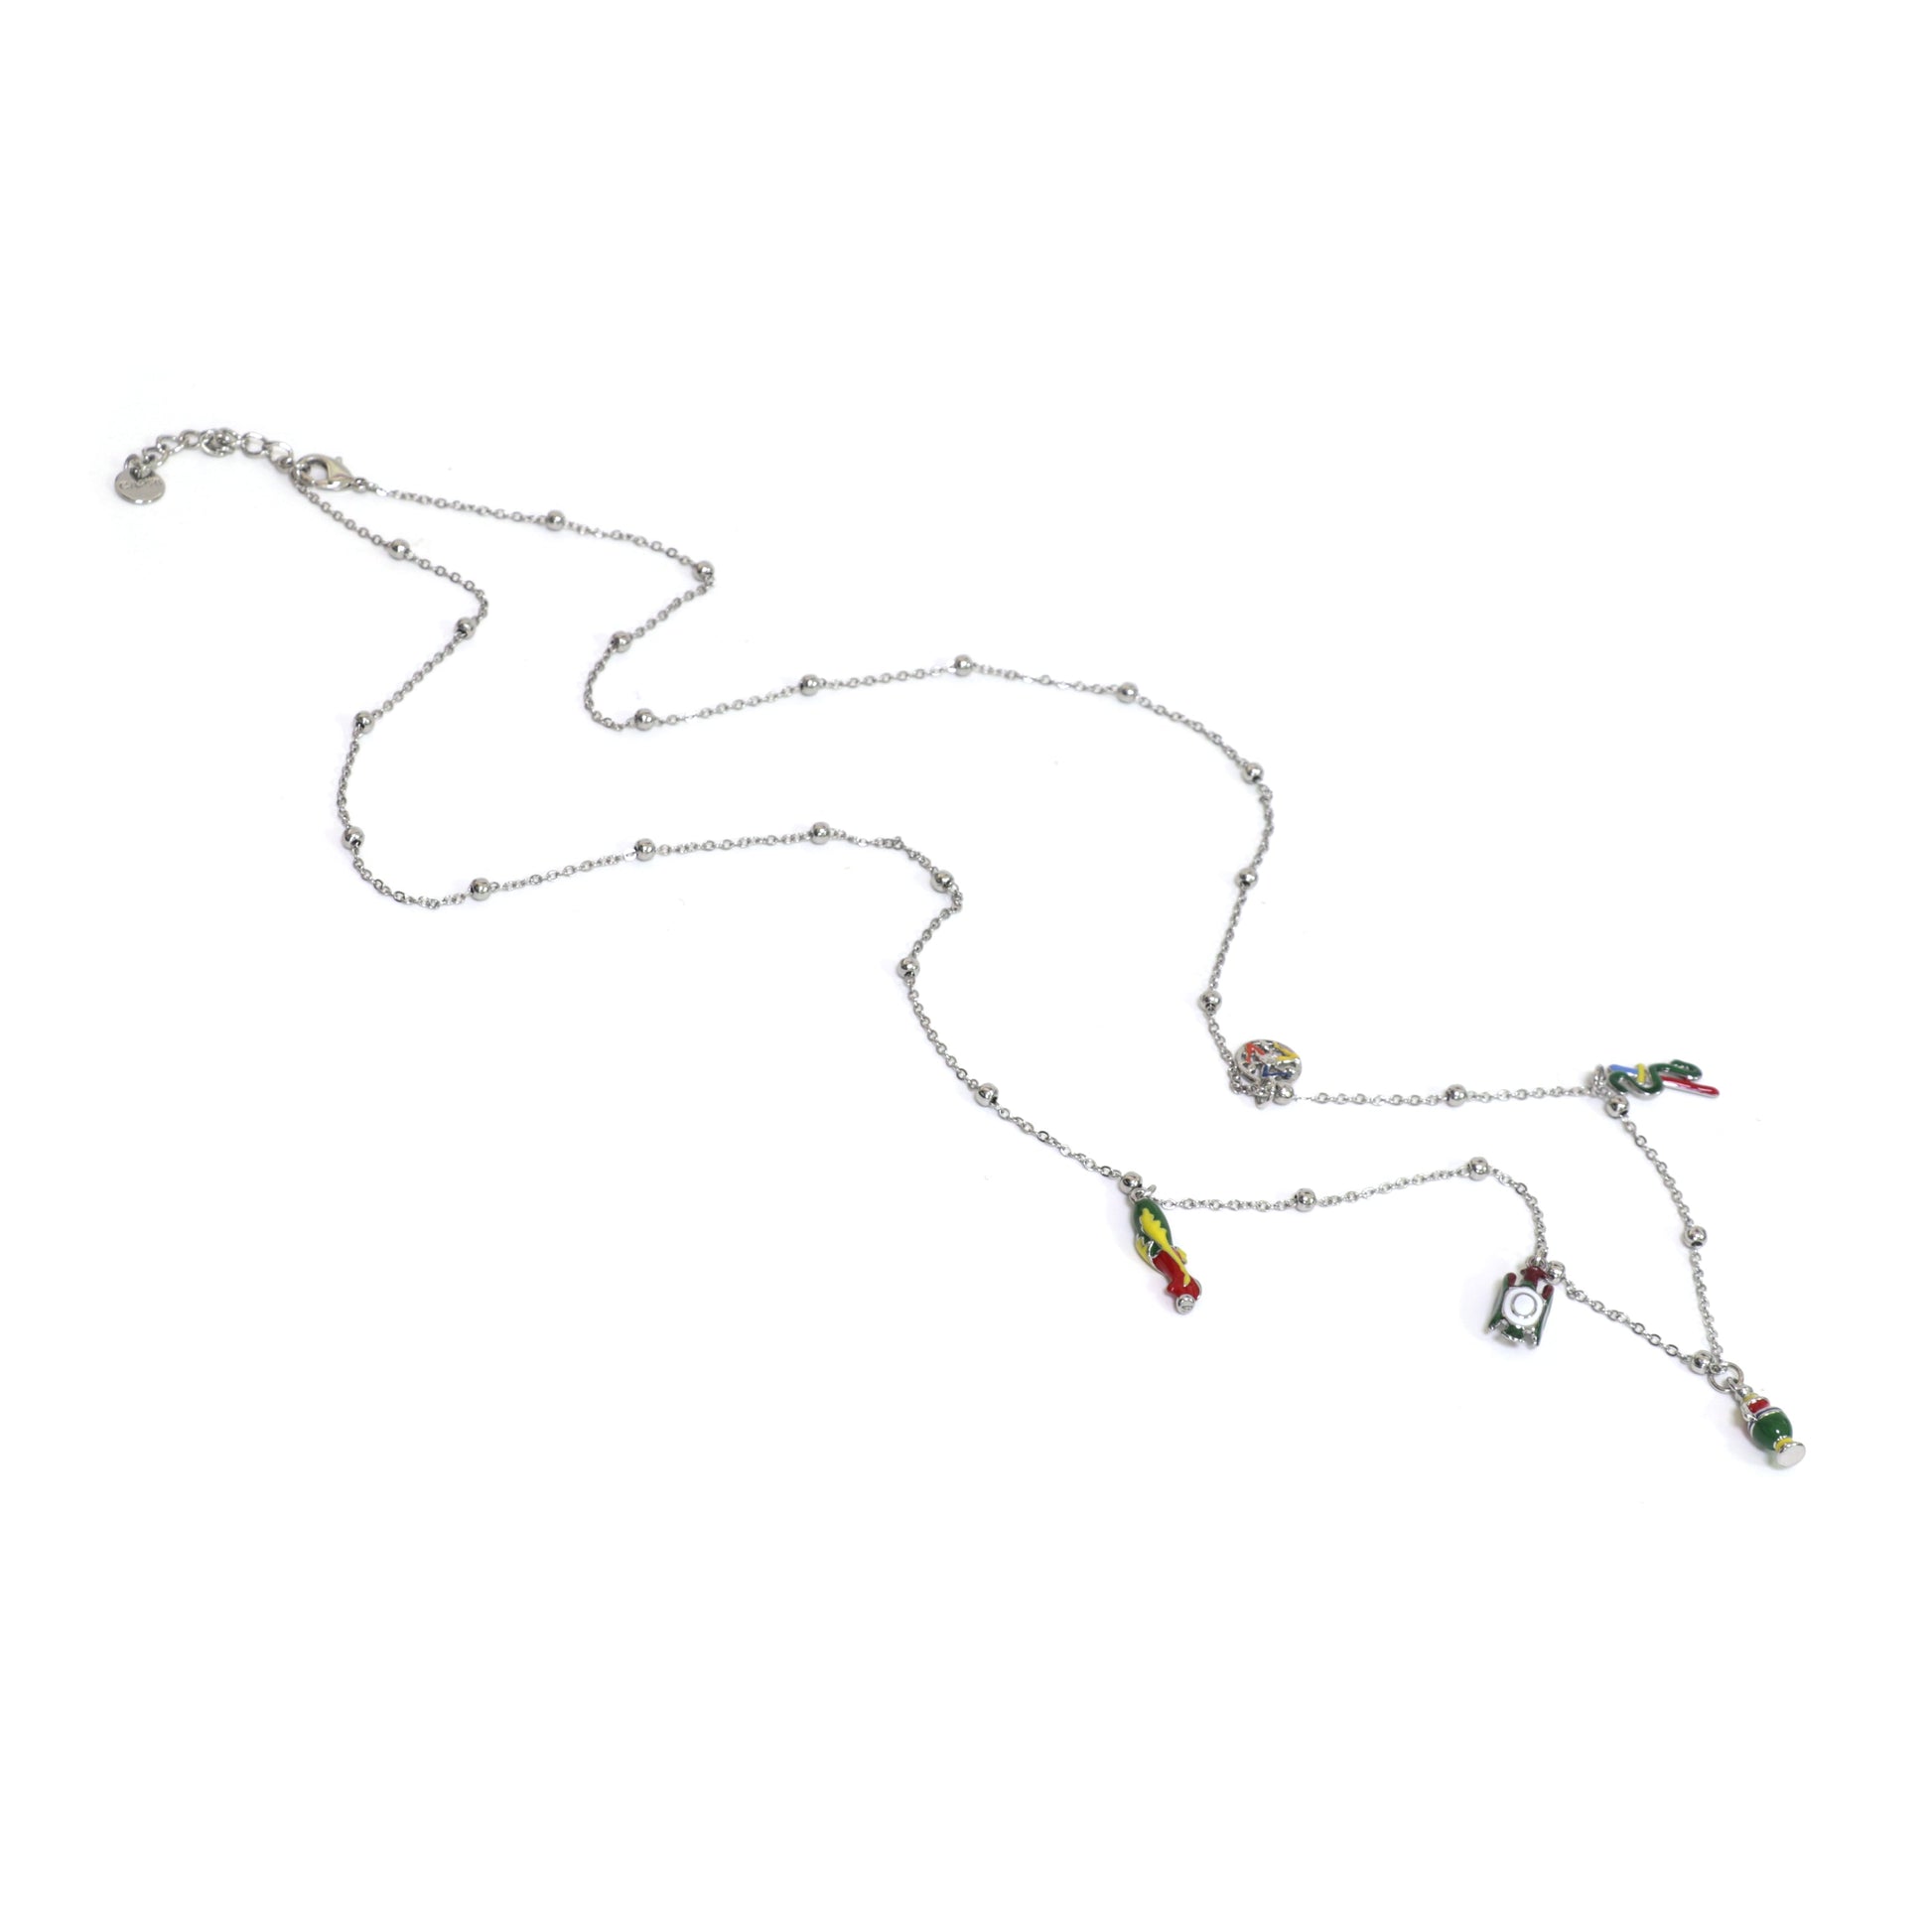 Multicond metal necklace, with pending Sicilian cards symbols, embellished with colored glazes